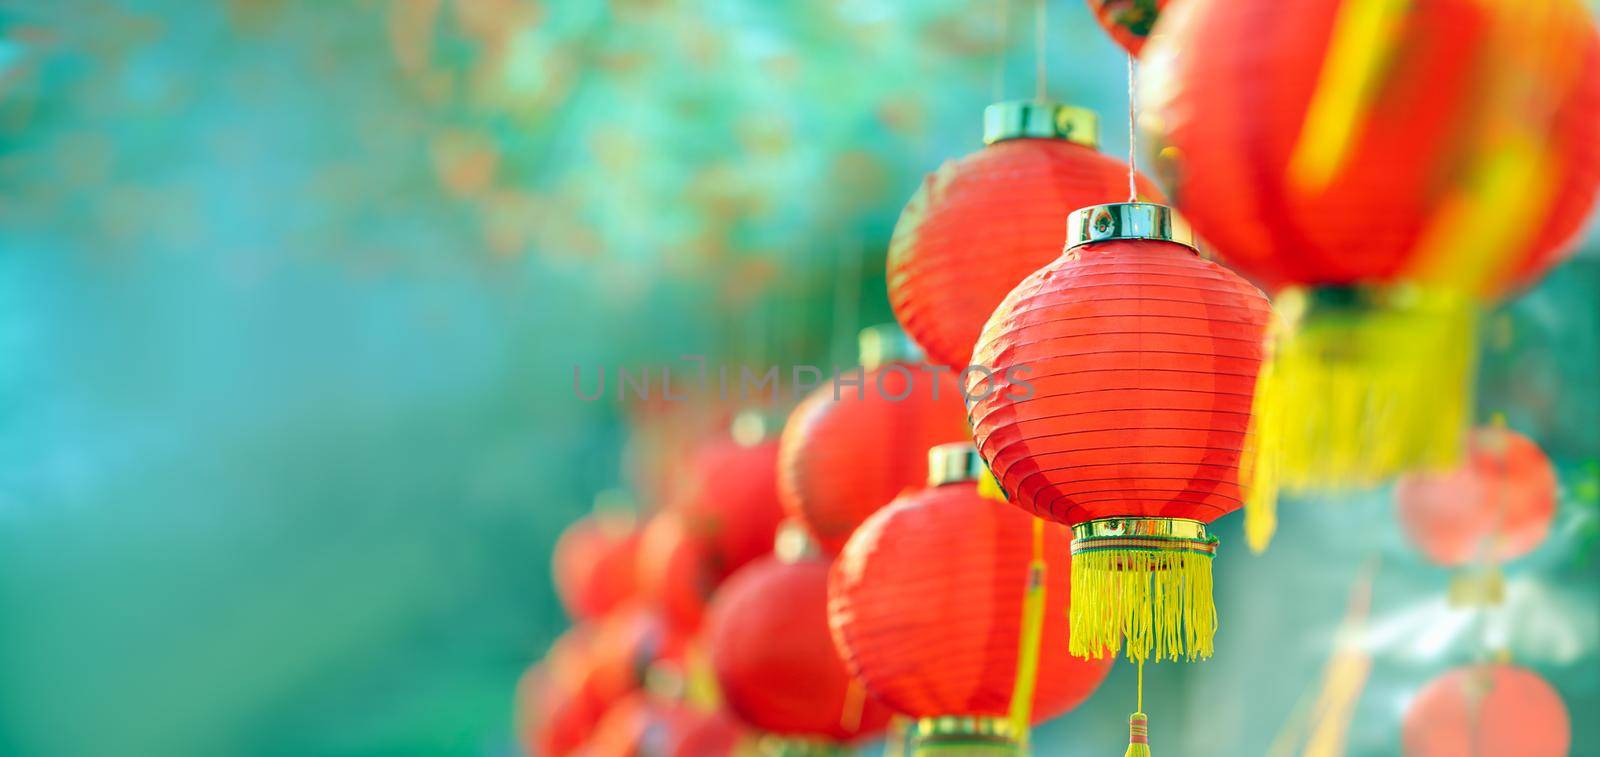 Chinese new year lanterns in chinatown. by toa55